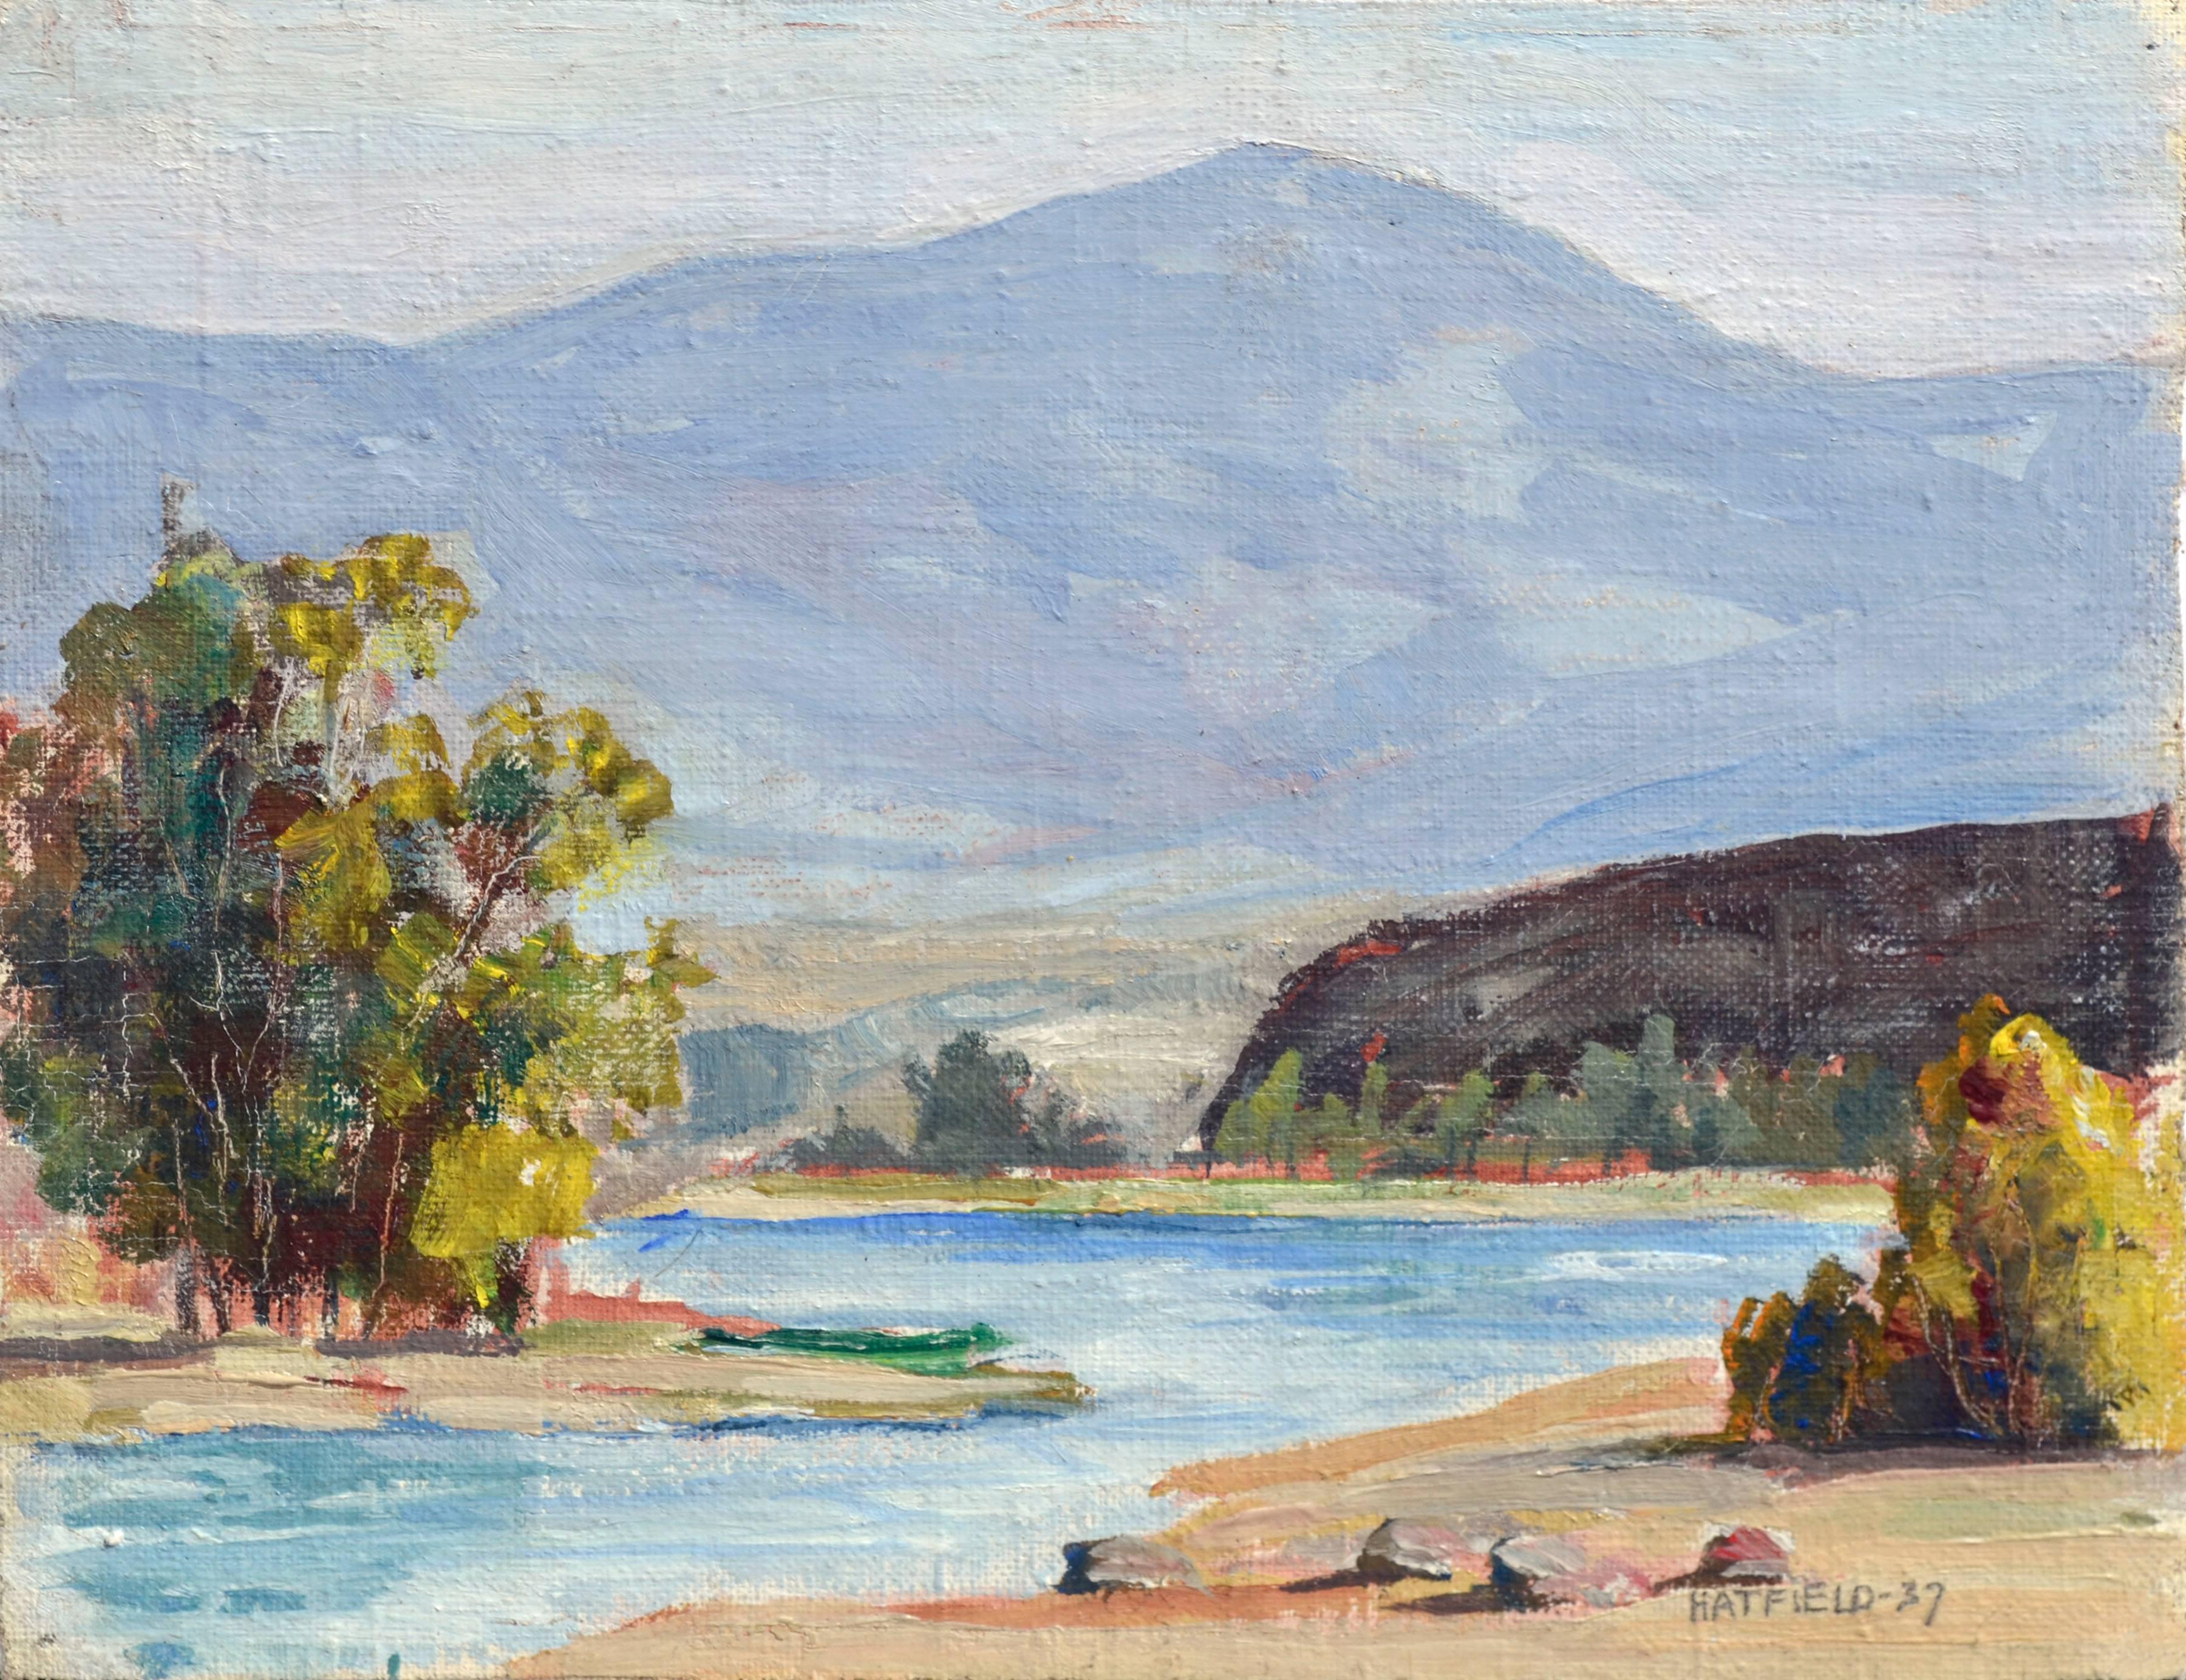 Quiet Stream, Small-Scale Mid Century California Landscape, 1937  - Painting by Dalzell Hatfield